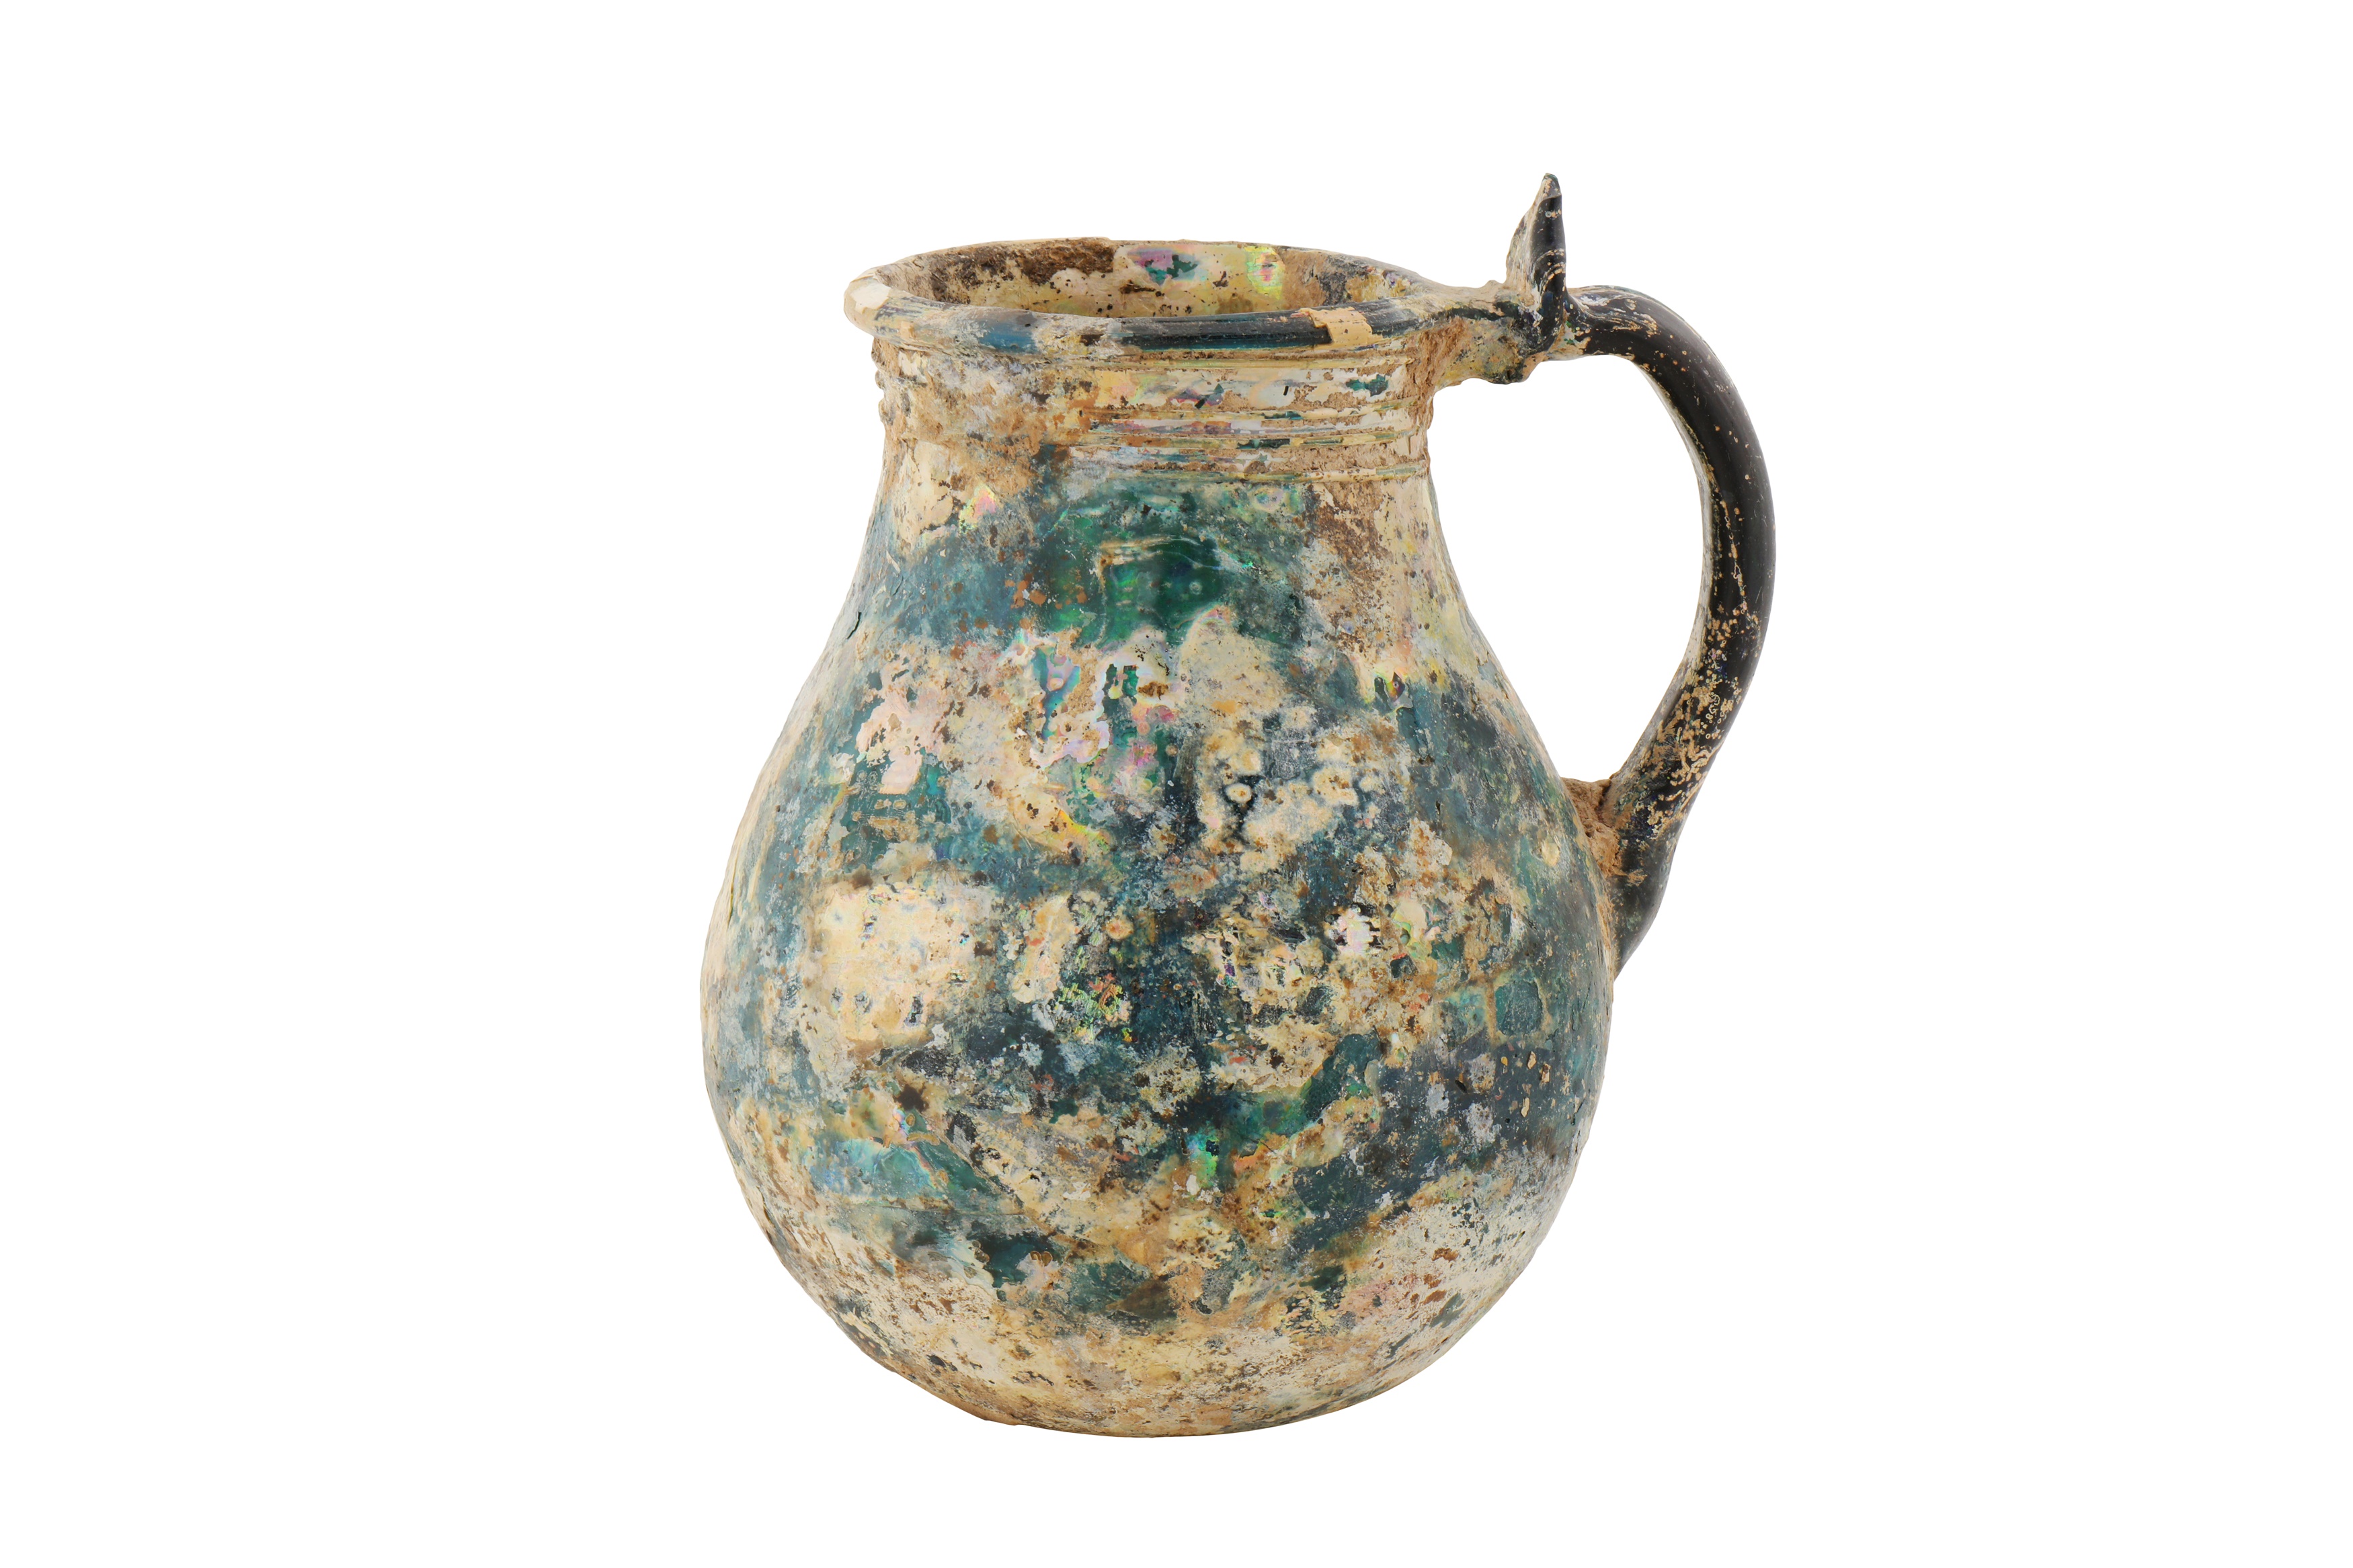 AN EARLY 10TH -12TH CENTURY IRIDESCENT GLASS VESSEL